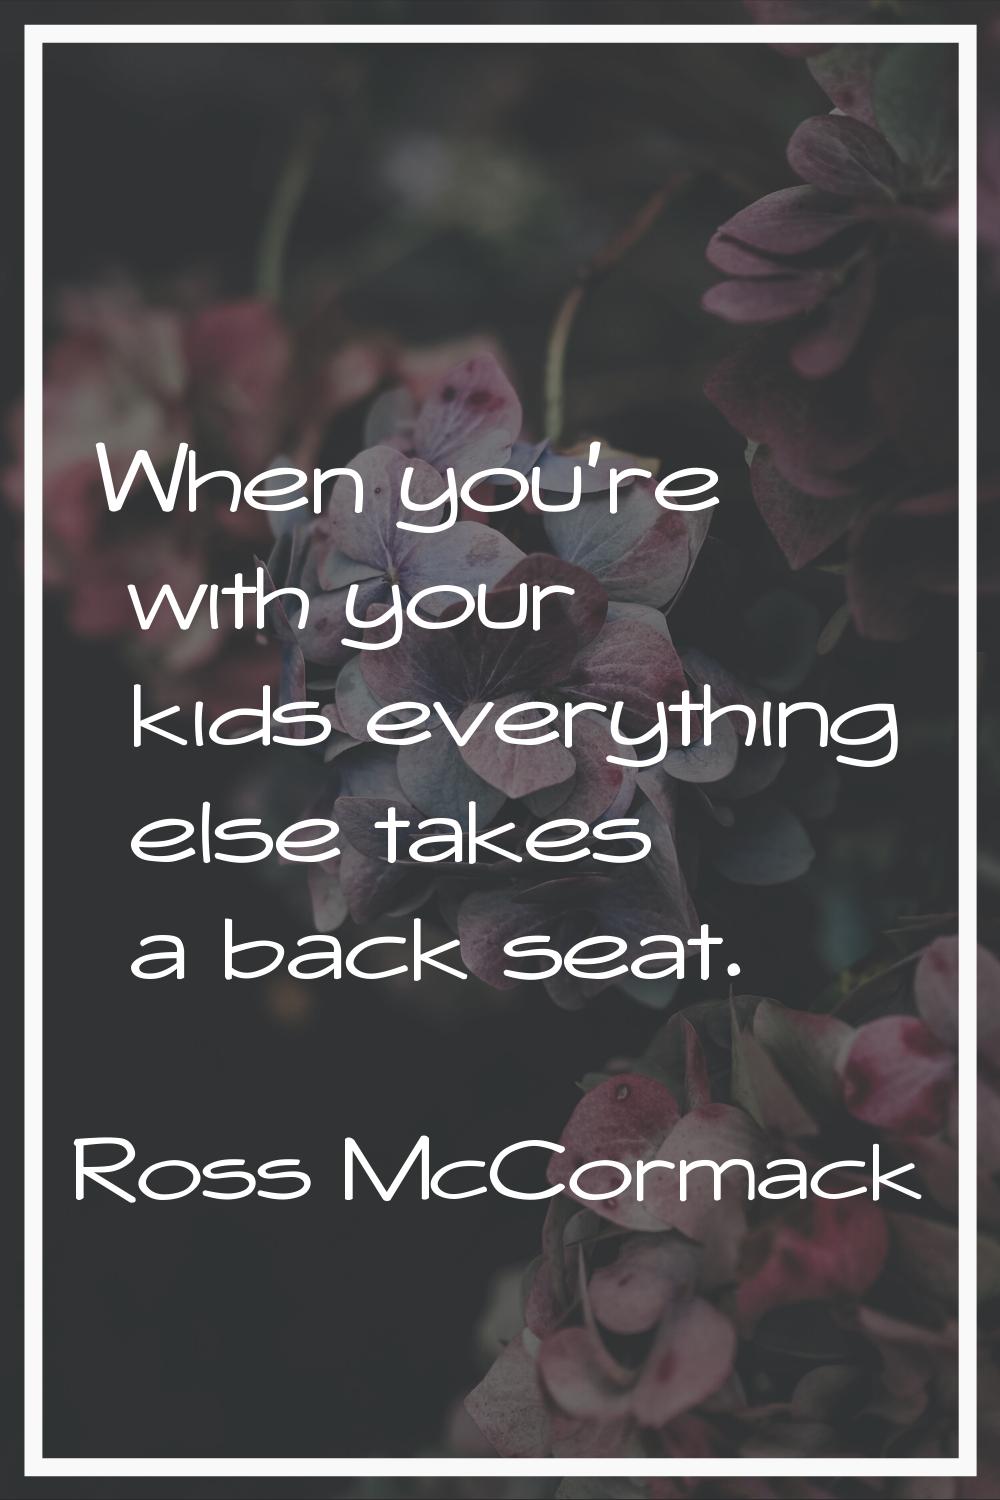 When you're with your kids everything else takes a back seat.